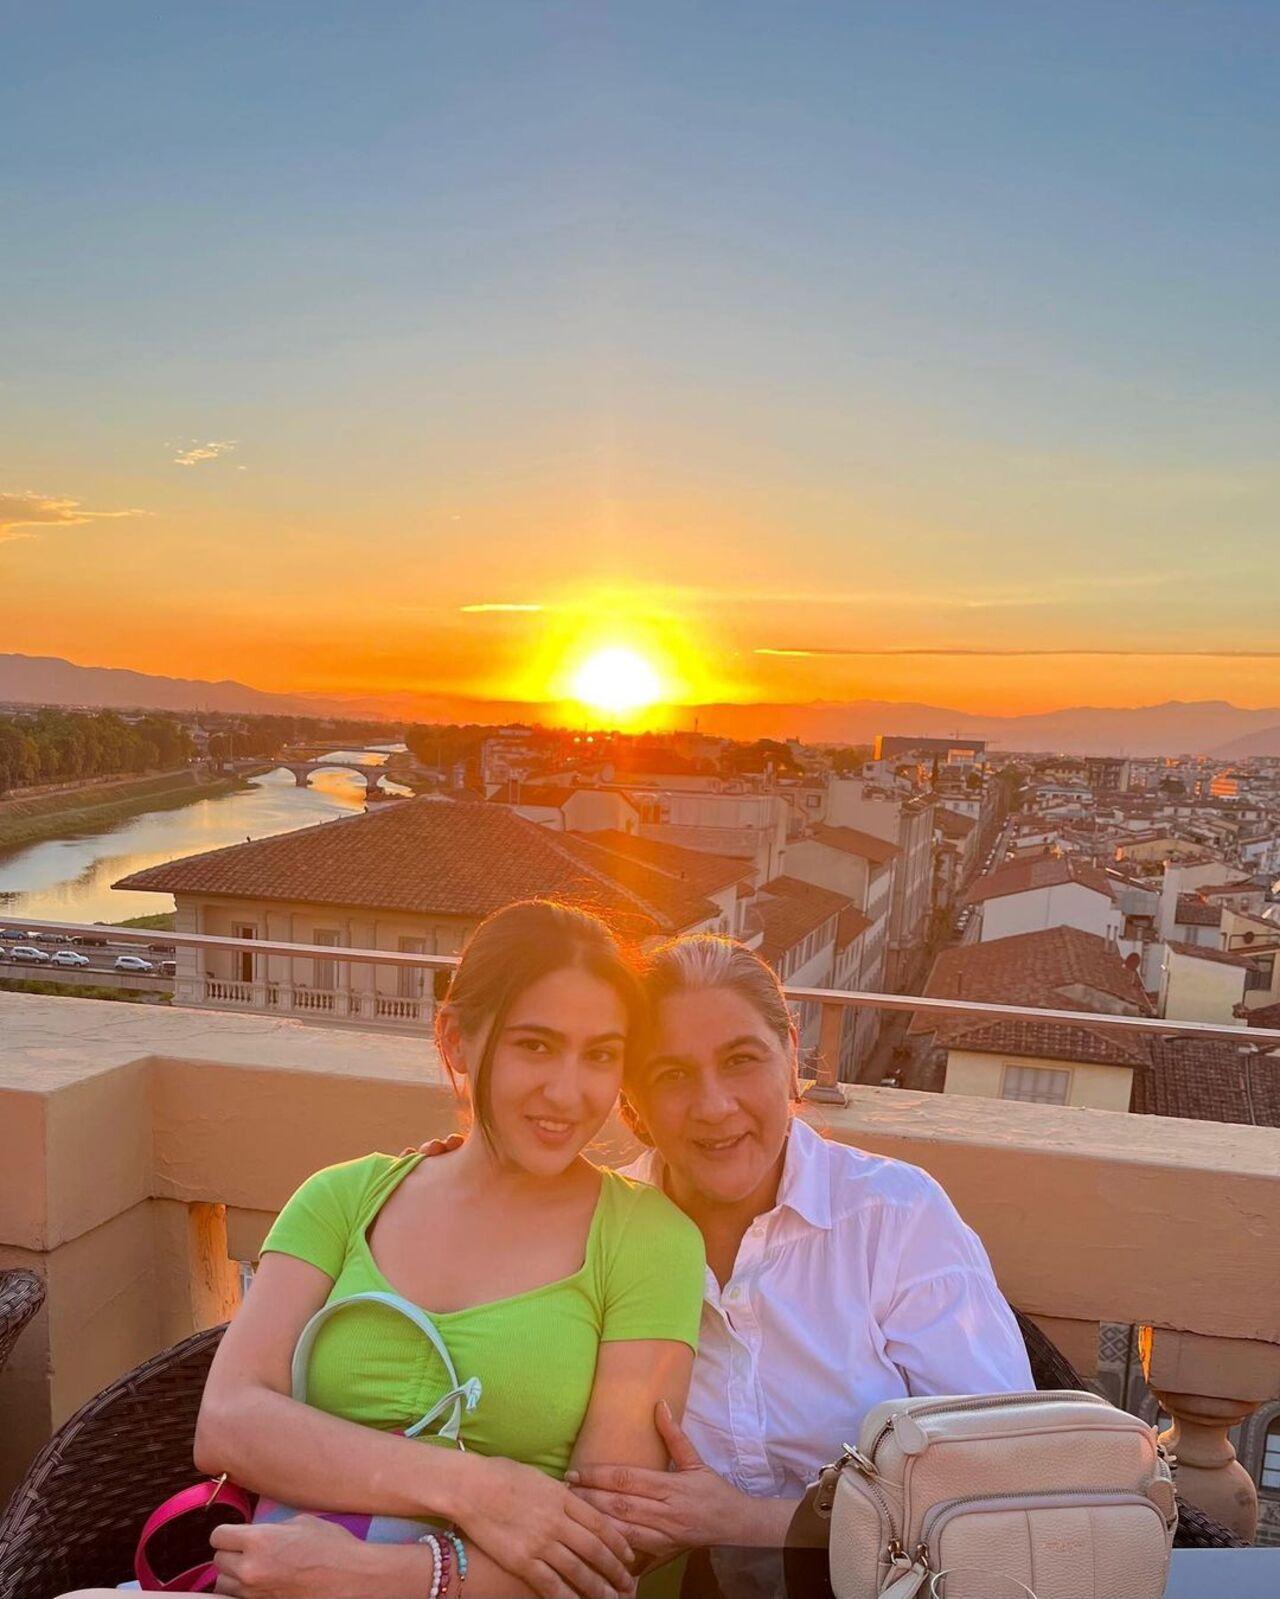 The mother-daughter duo pose in the foreground of a beautiful sunset in Florence